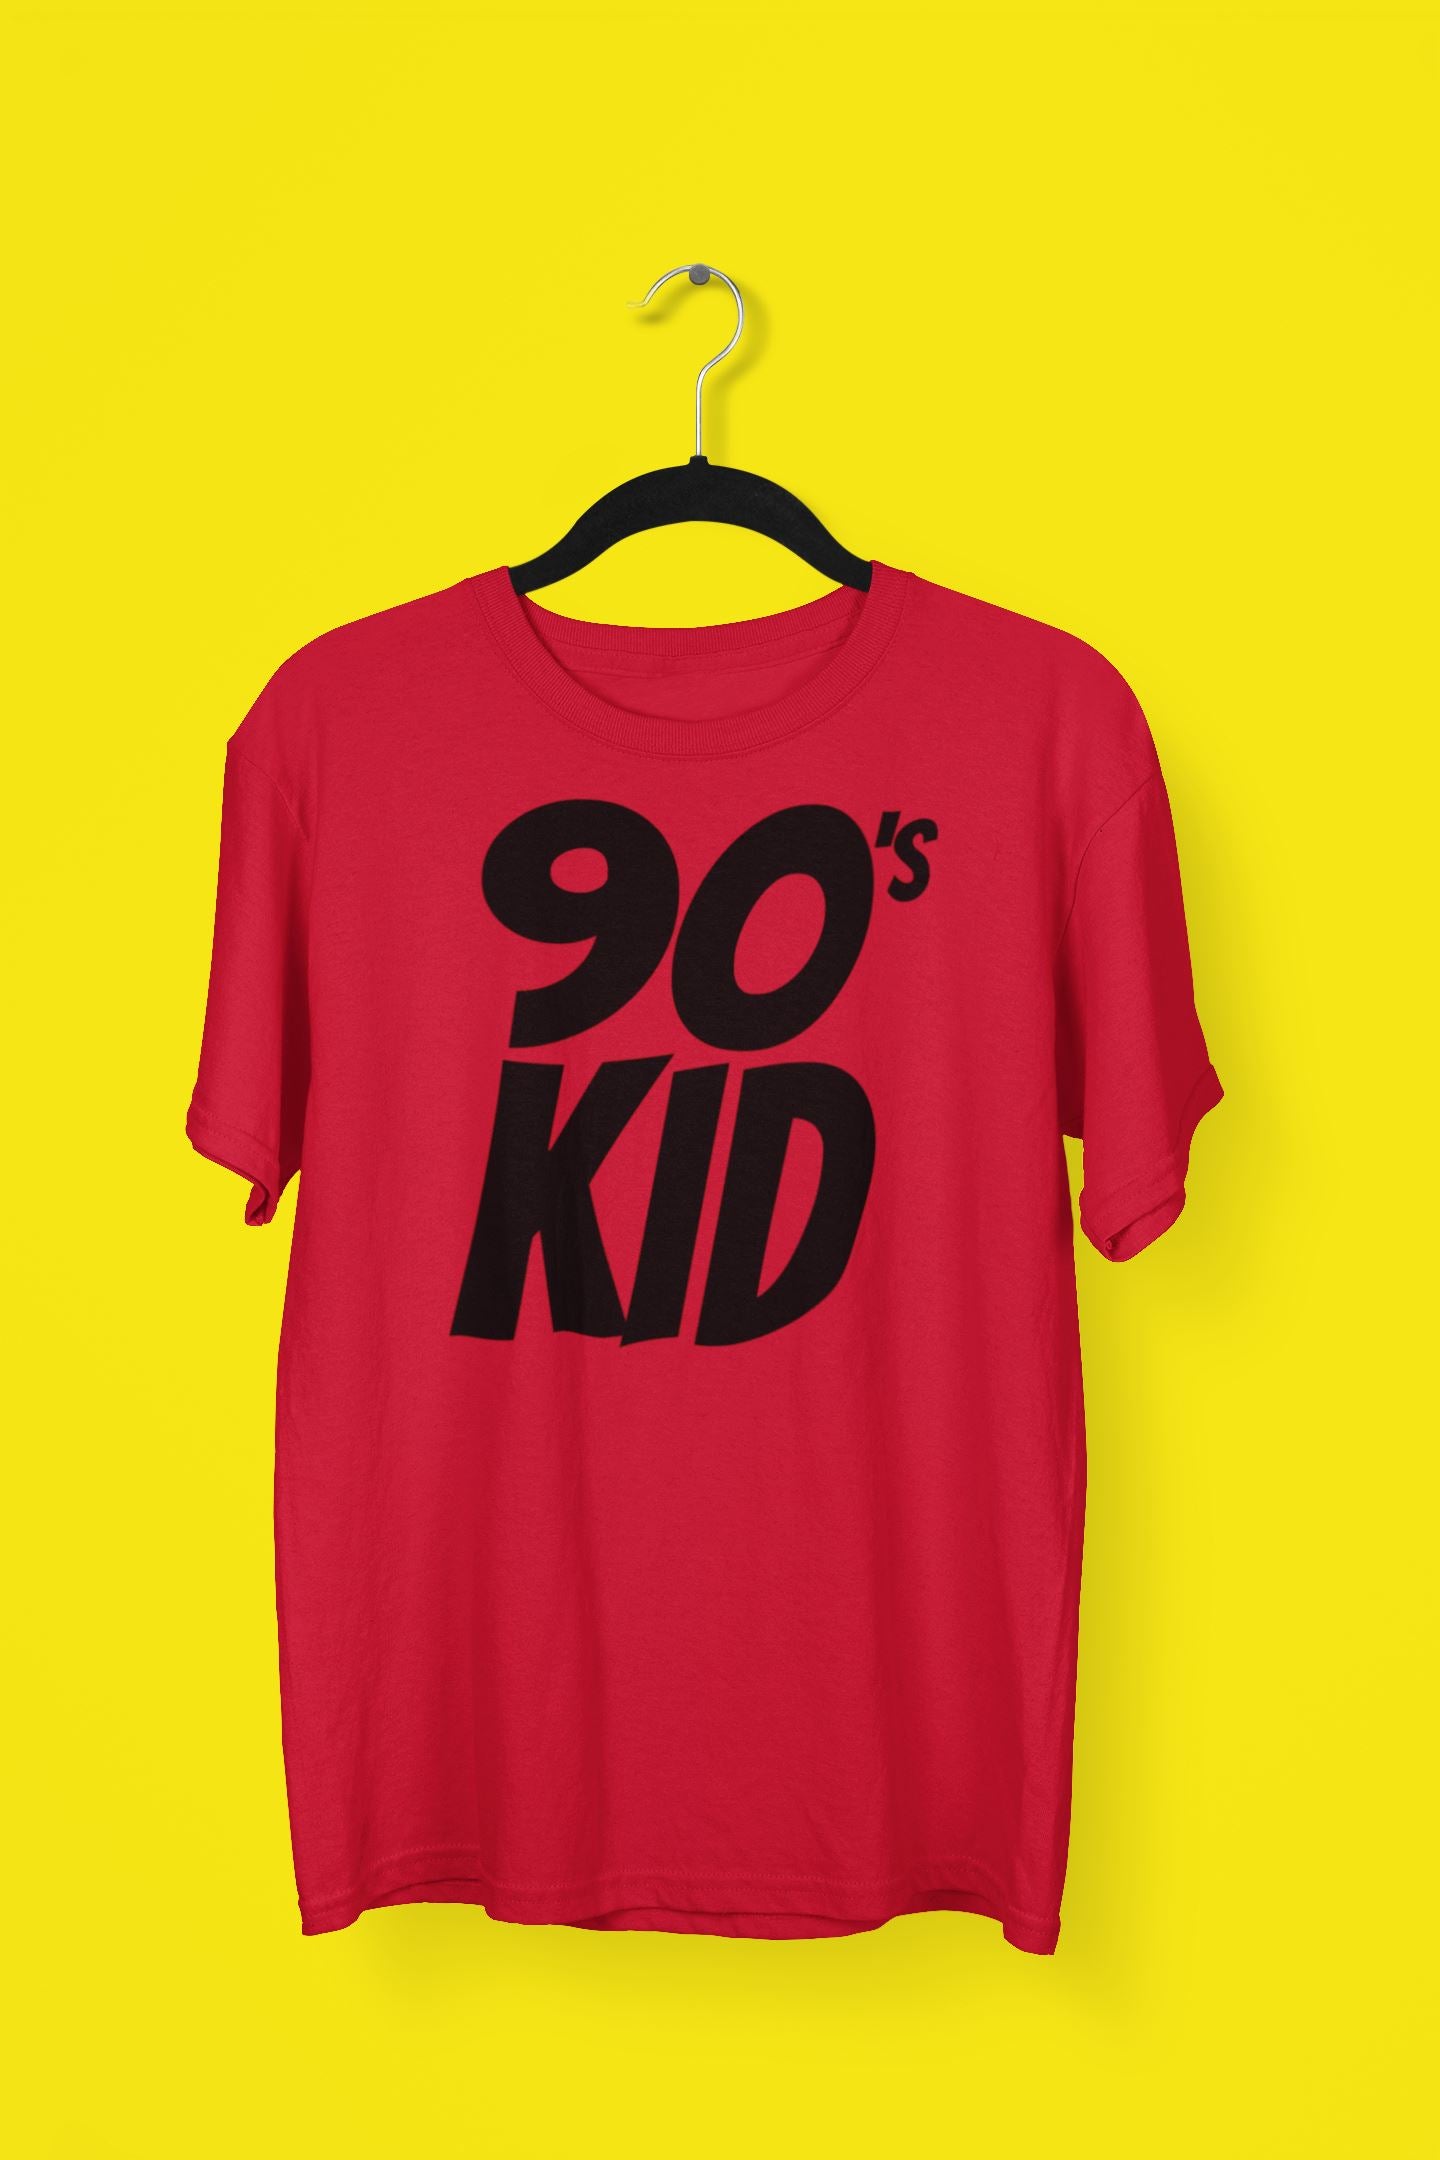 90"s Kid Special White T Shirt for Men and Women Born in the 90's freeshipping - Catch My Drift India